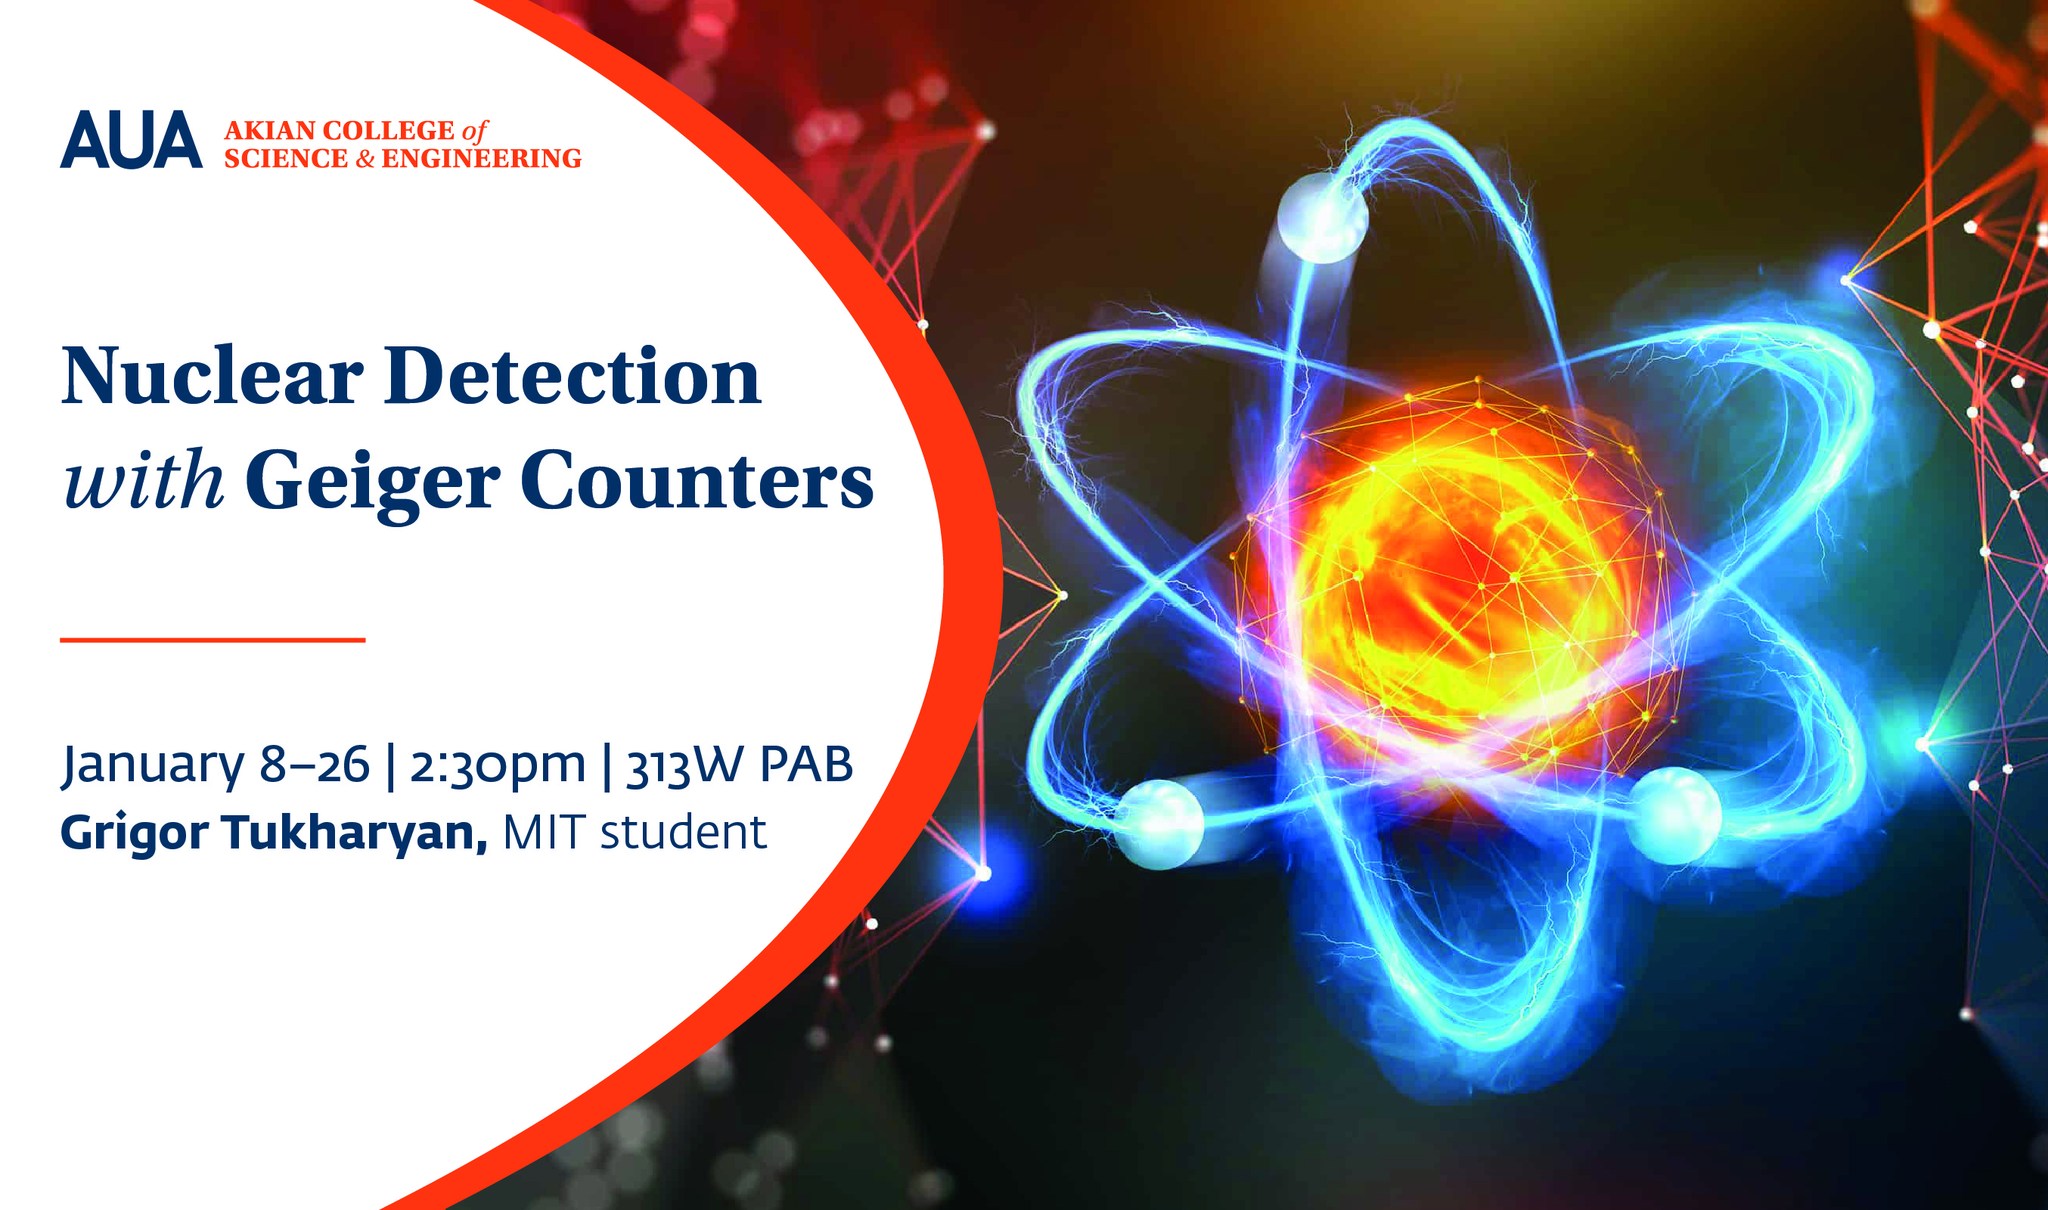 Nuclear Detection with Geiger Counters